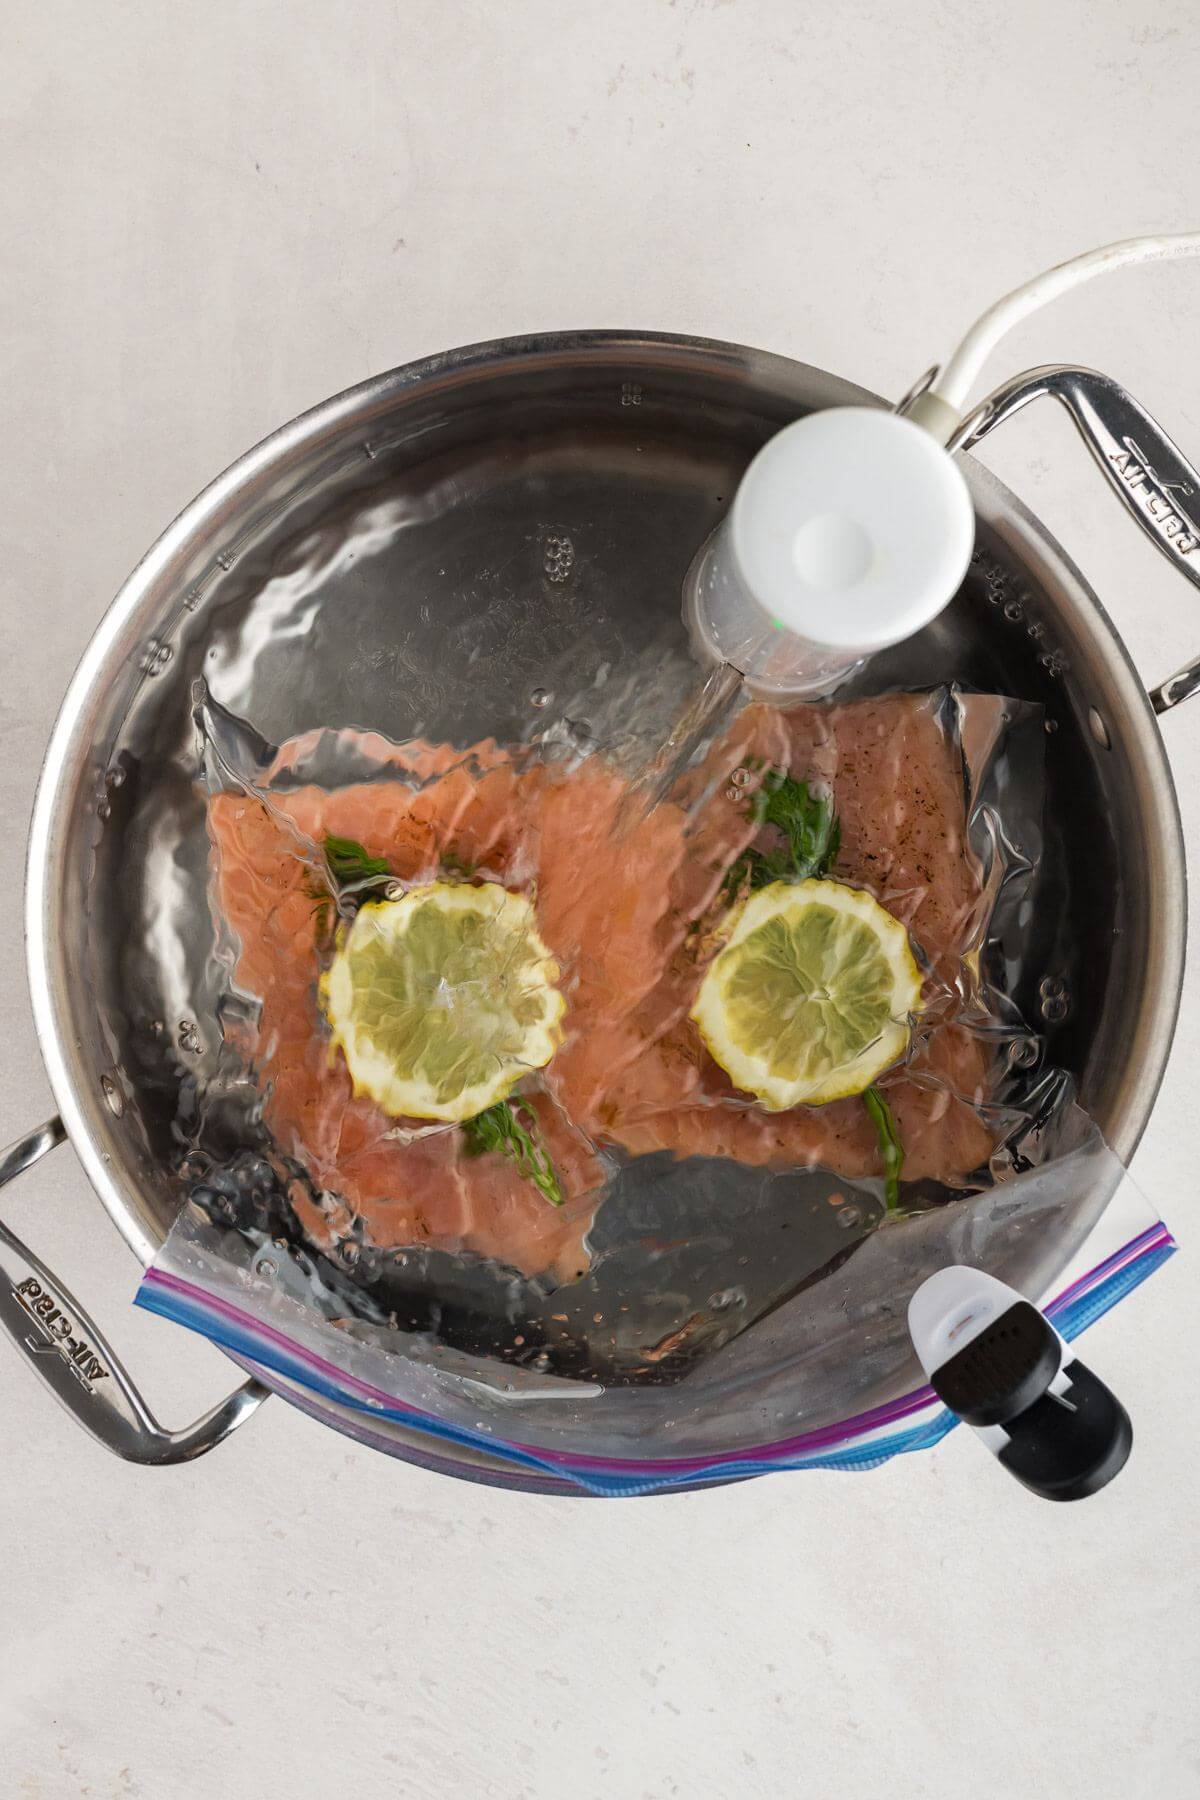 A Ziploc bag with salmon filets cooks in a water-filled pot sous vide style.